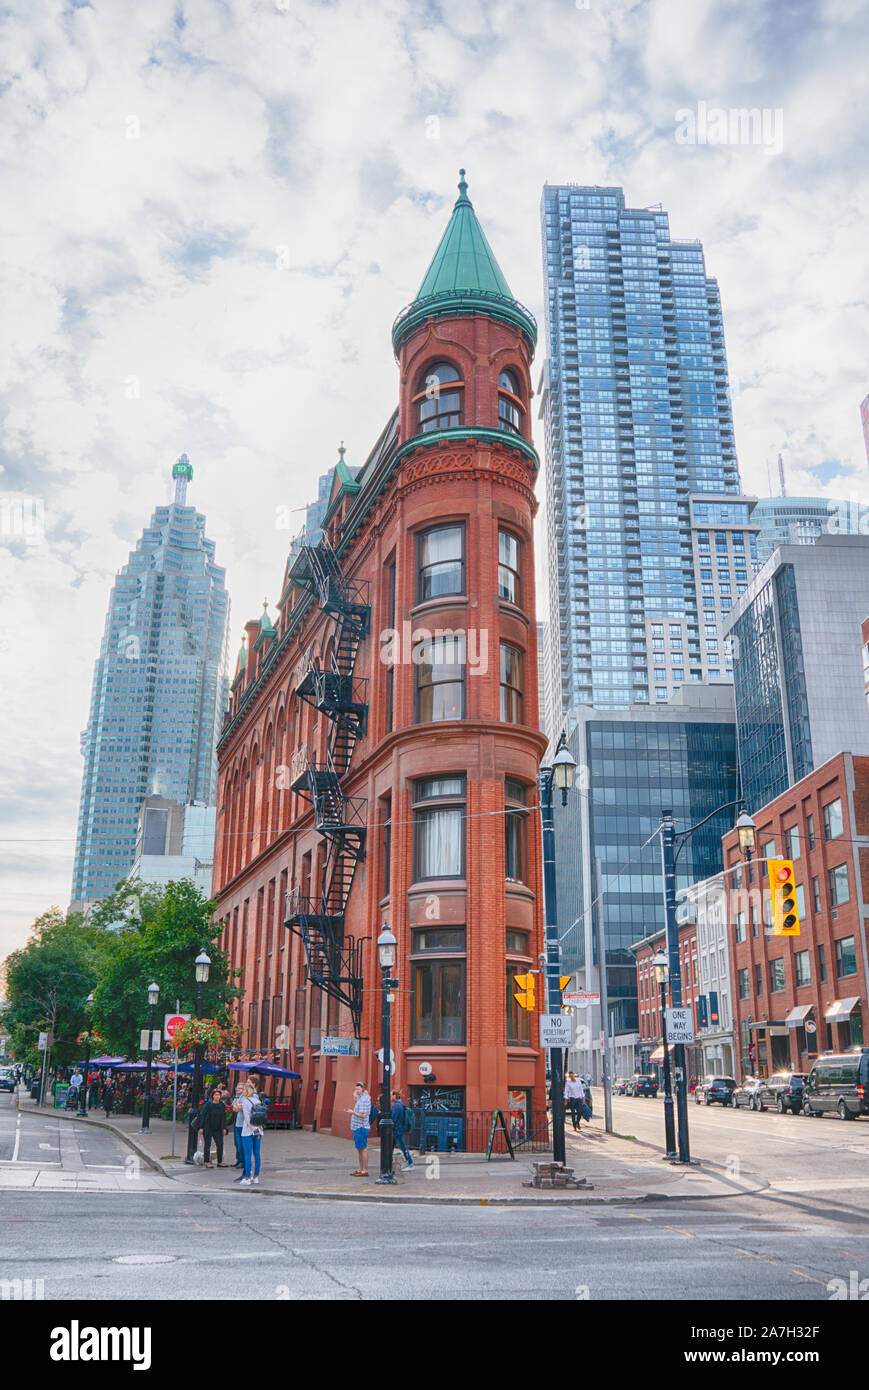 Toronto, CA - September 20, 2019: The historic Gooderham Building, also known known as the Flatiron Building,  in the Financial District of Toronto, C Stock Photo